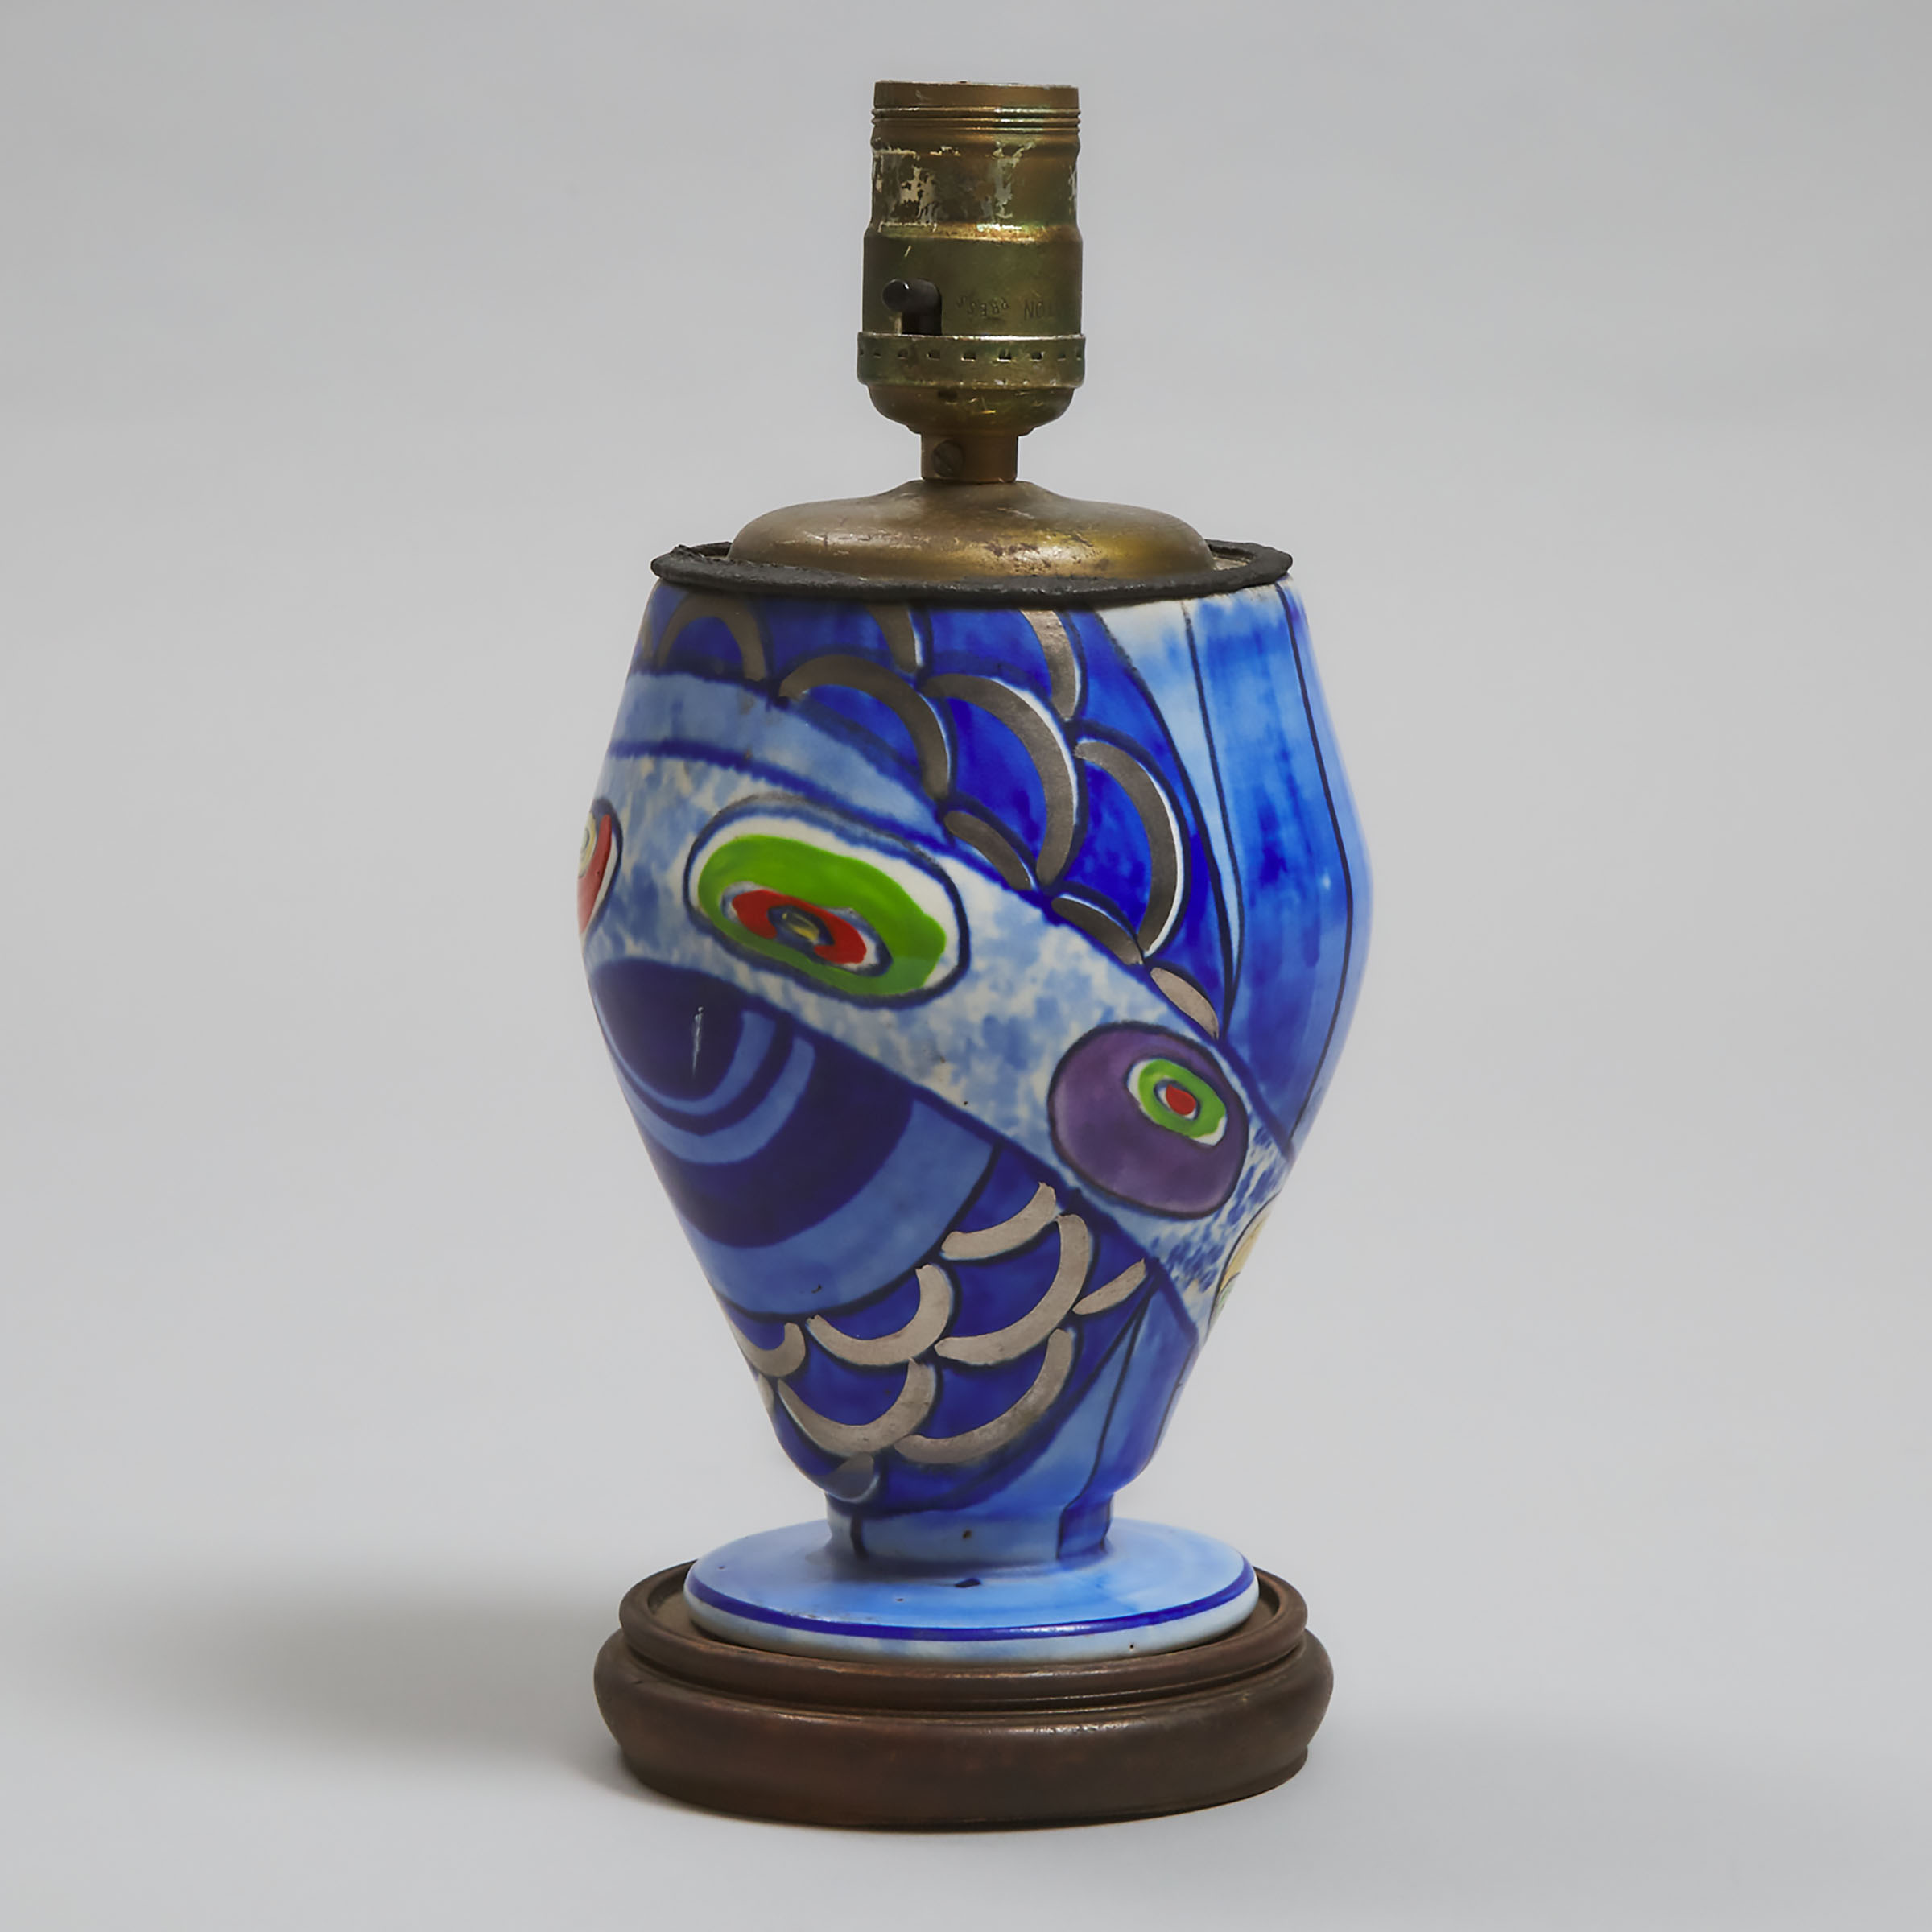 Wilkinson Vase as a Table Lamp, Clarice Cliff, c.1930